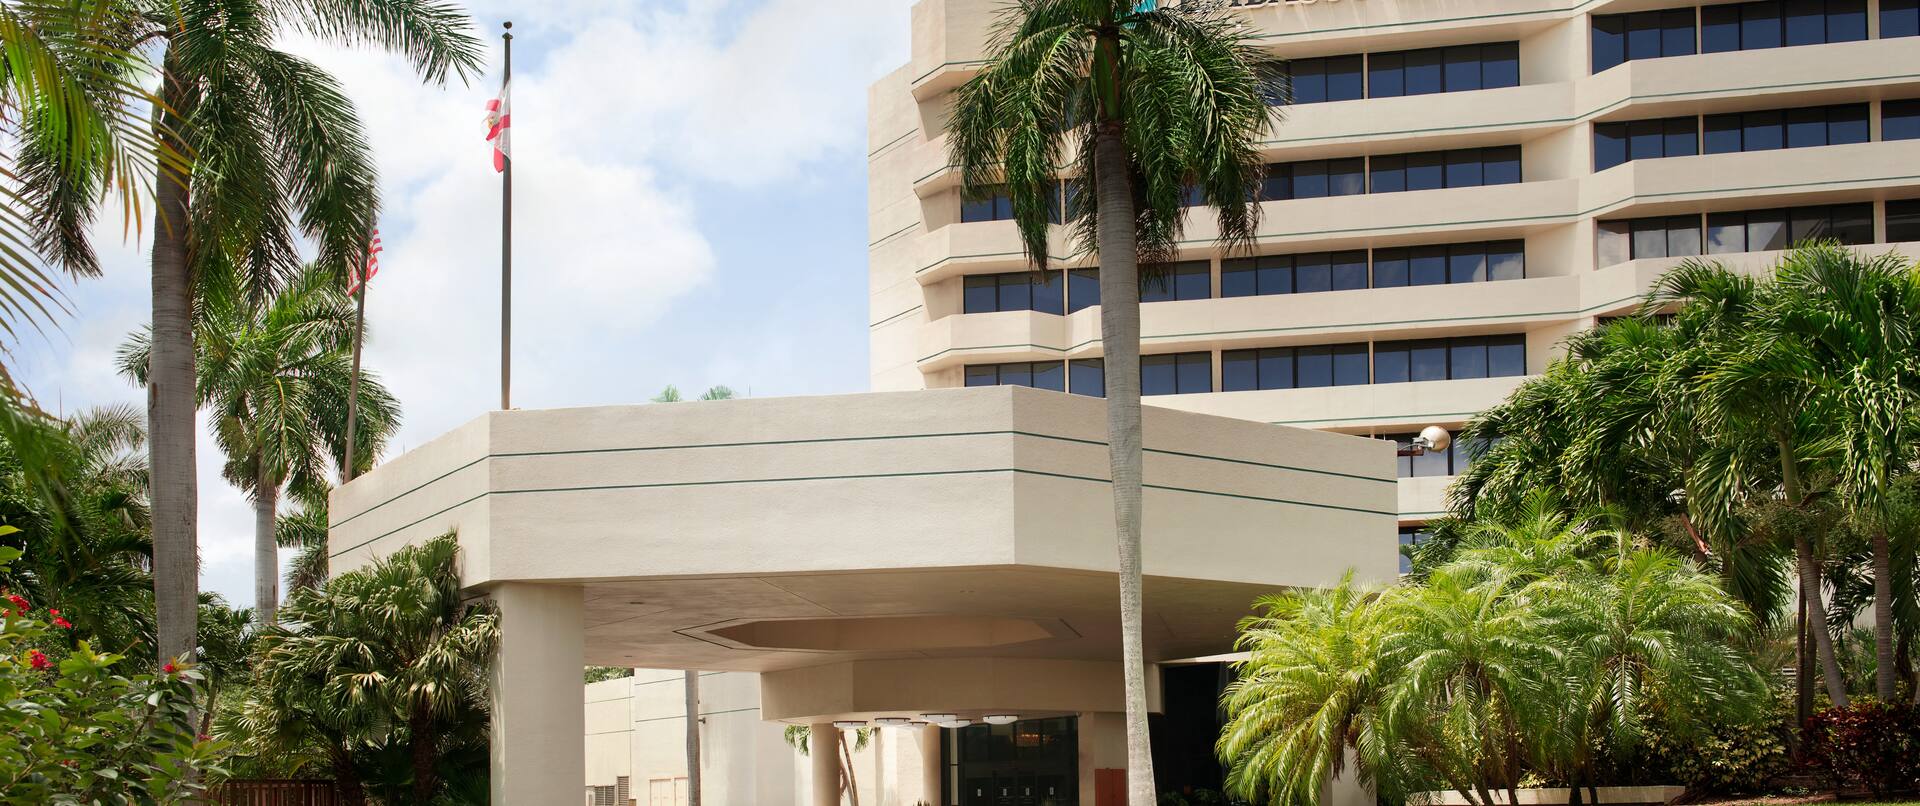 Daytime View of Hotel Exterior, Signage, Flagpole, Landscaping, and Porte Cochère